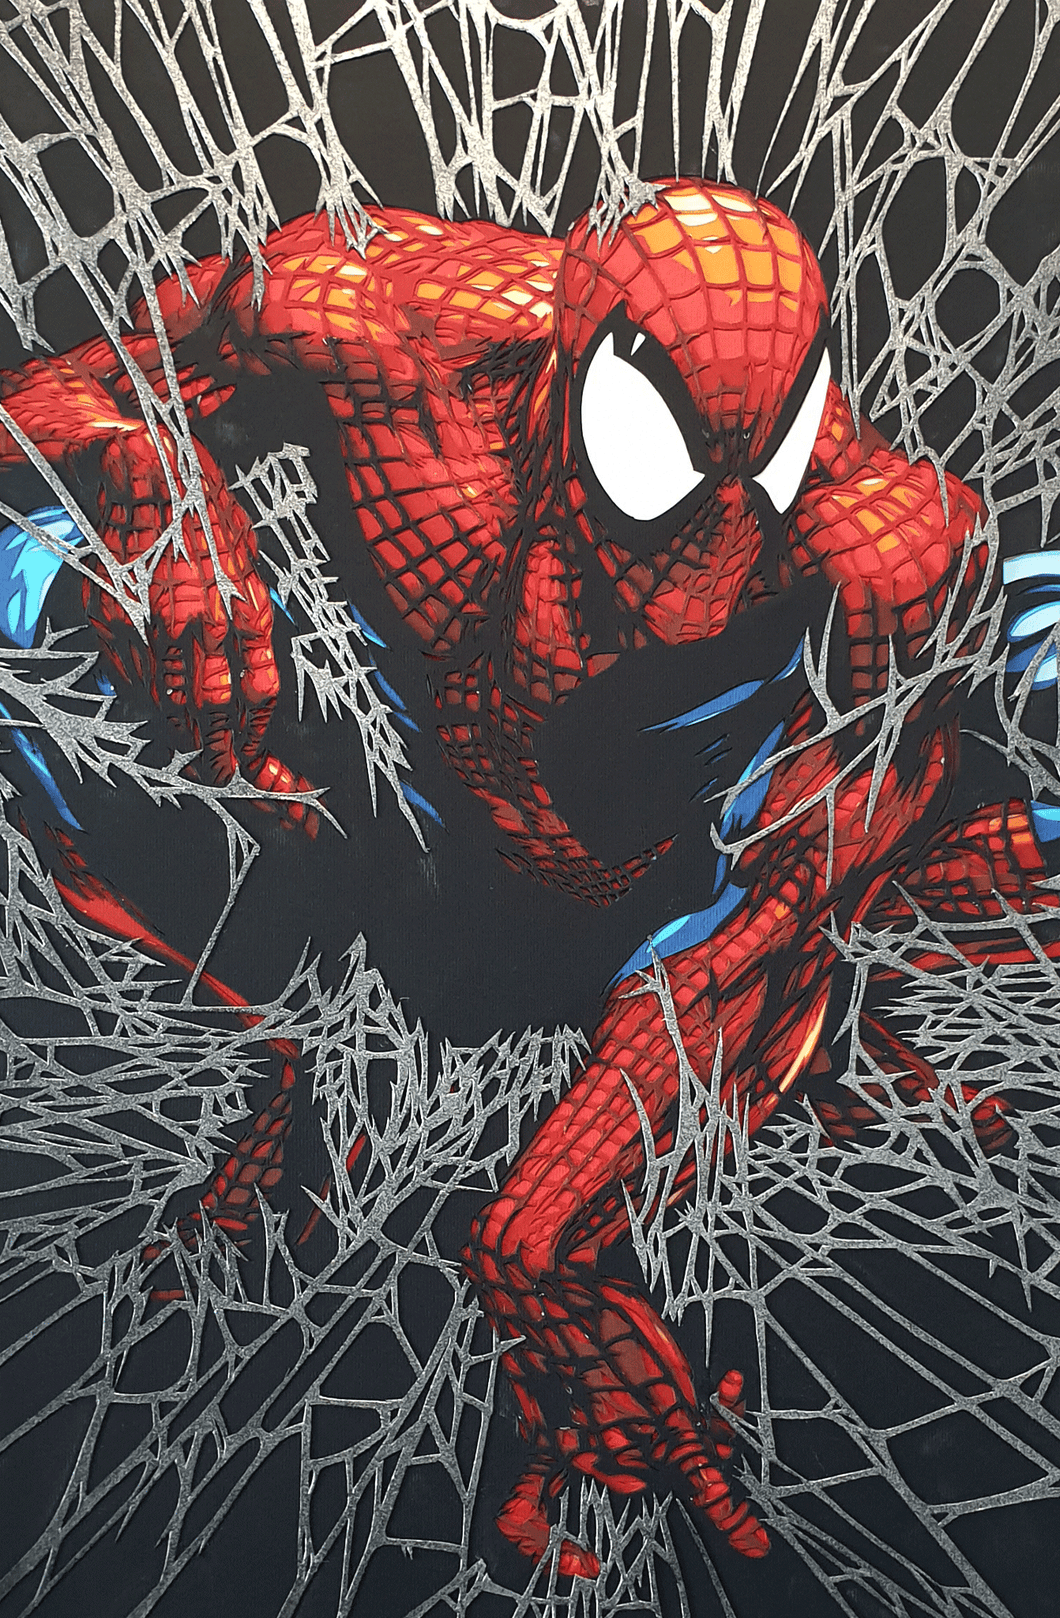 Amazing Spiderman 1 (Clayton Crain Homage) by Rick Sharif [A3 Size (297 x 420 mm) (11.7 x 16.5 in)]